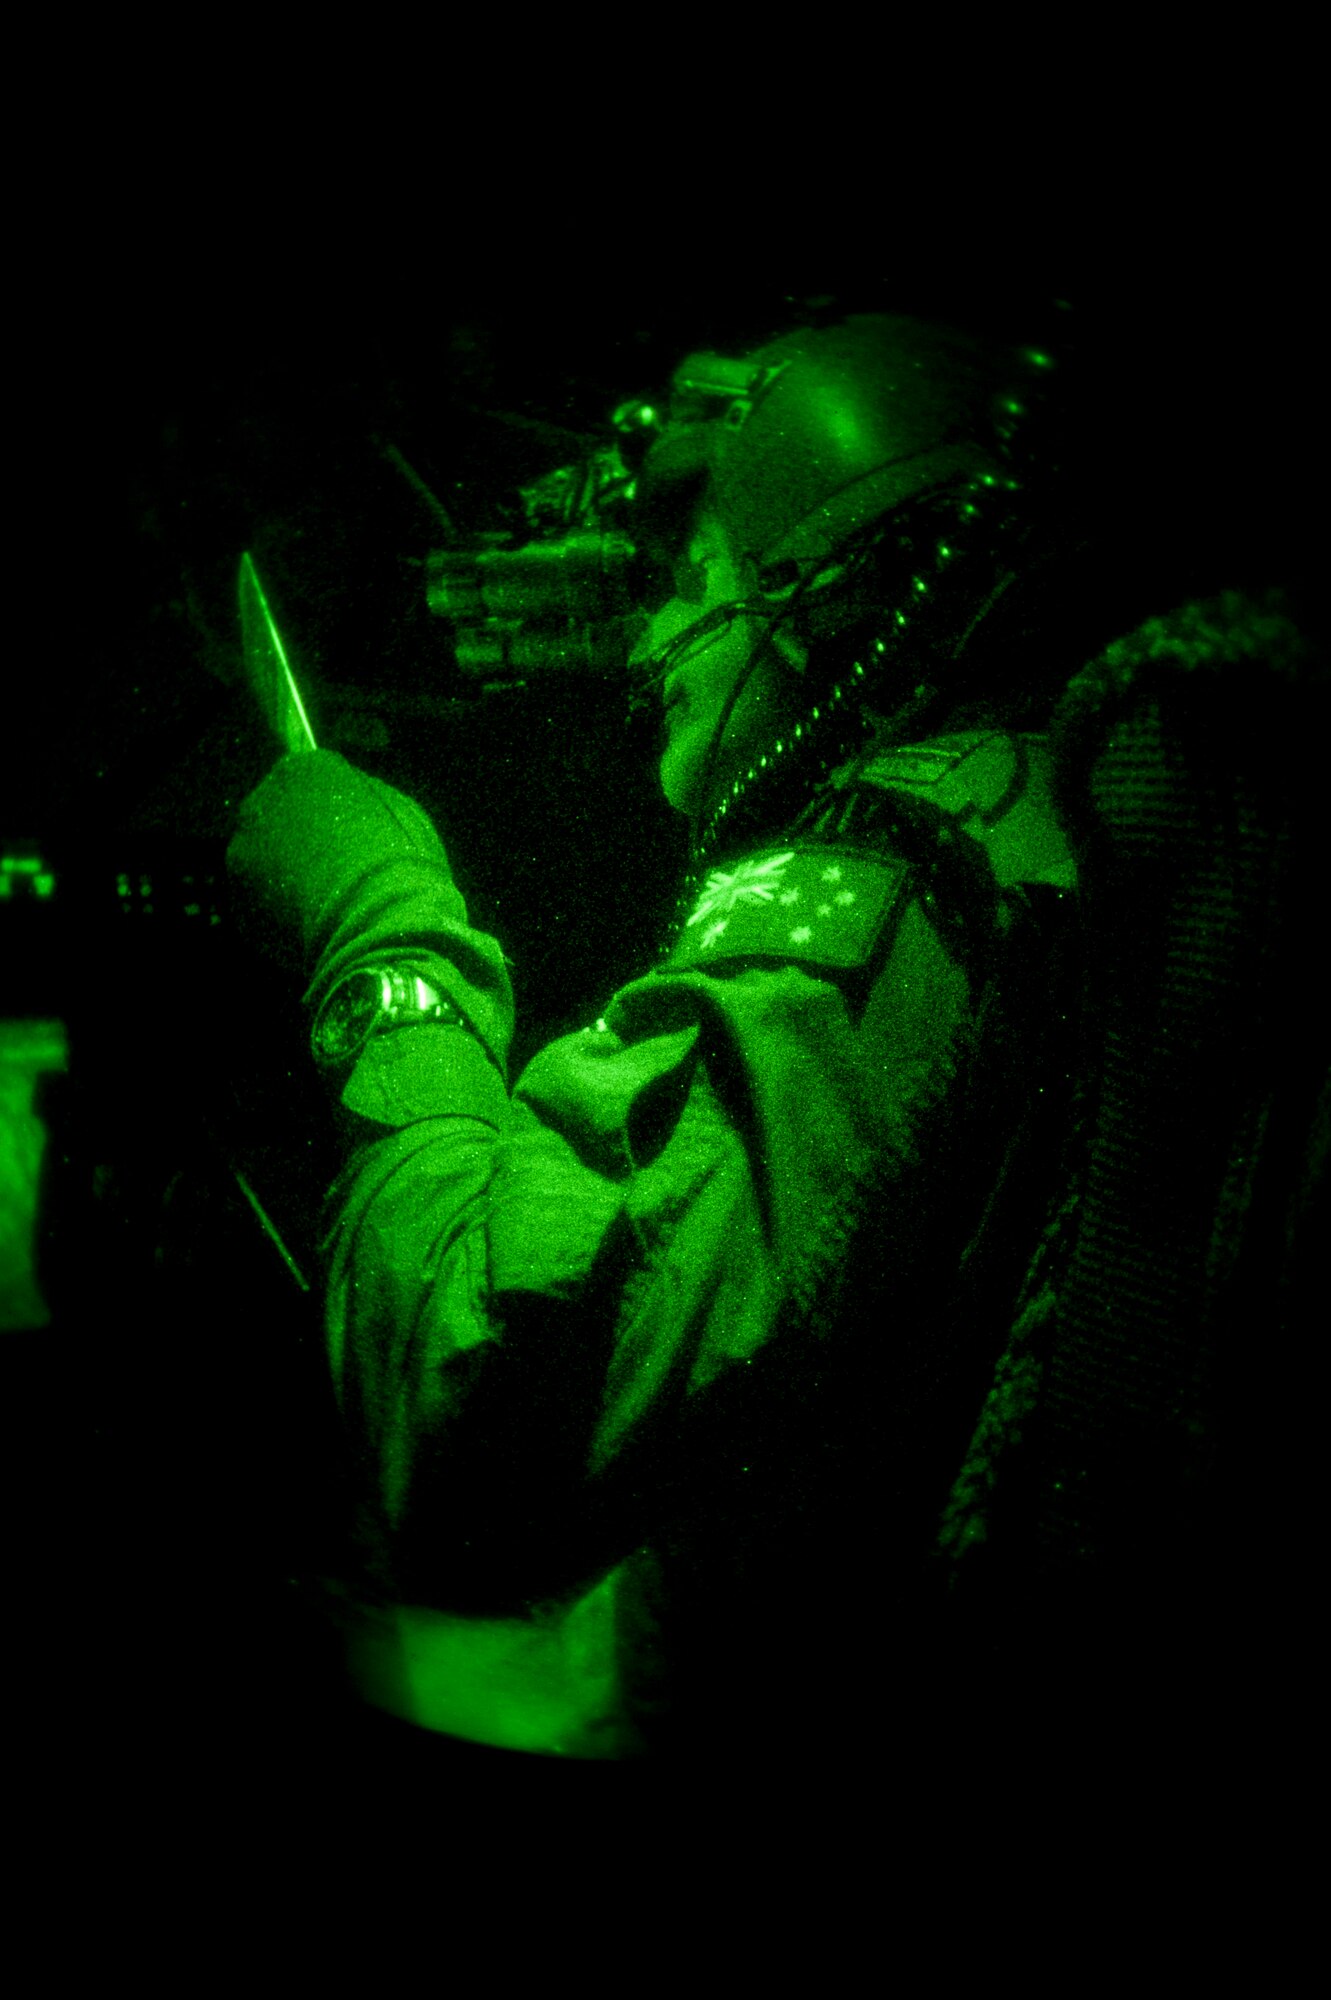 A Royal Australian air force C-130J Super Hercules pilot, prepares for a training exercise during Red Flag 15-1 at Nellis Air Force Base, Nev., Feb. 9, 2015. Flying units from around the globe deploy to Nellis AFB to participate in Red Flag, an exercise held four times a year and organized by the 414th Combat Training Squadron. (U.S. Air Force photo by Senior Airman Thomas Spangler)